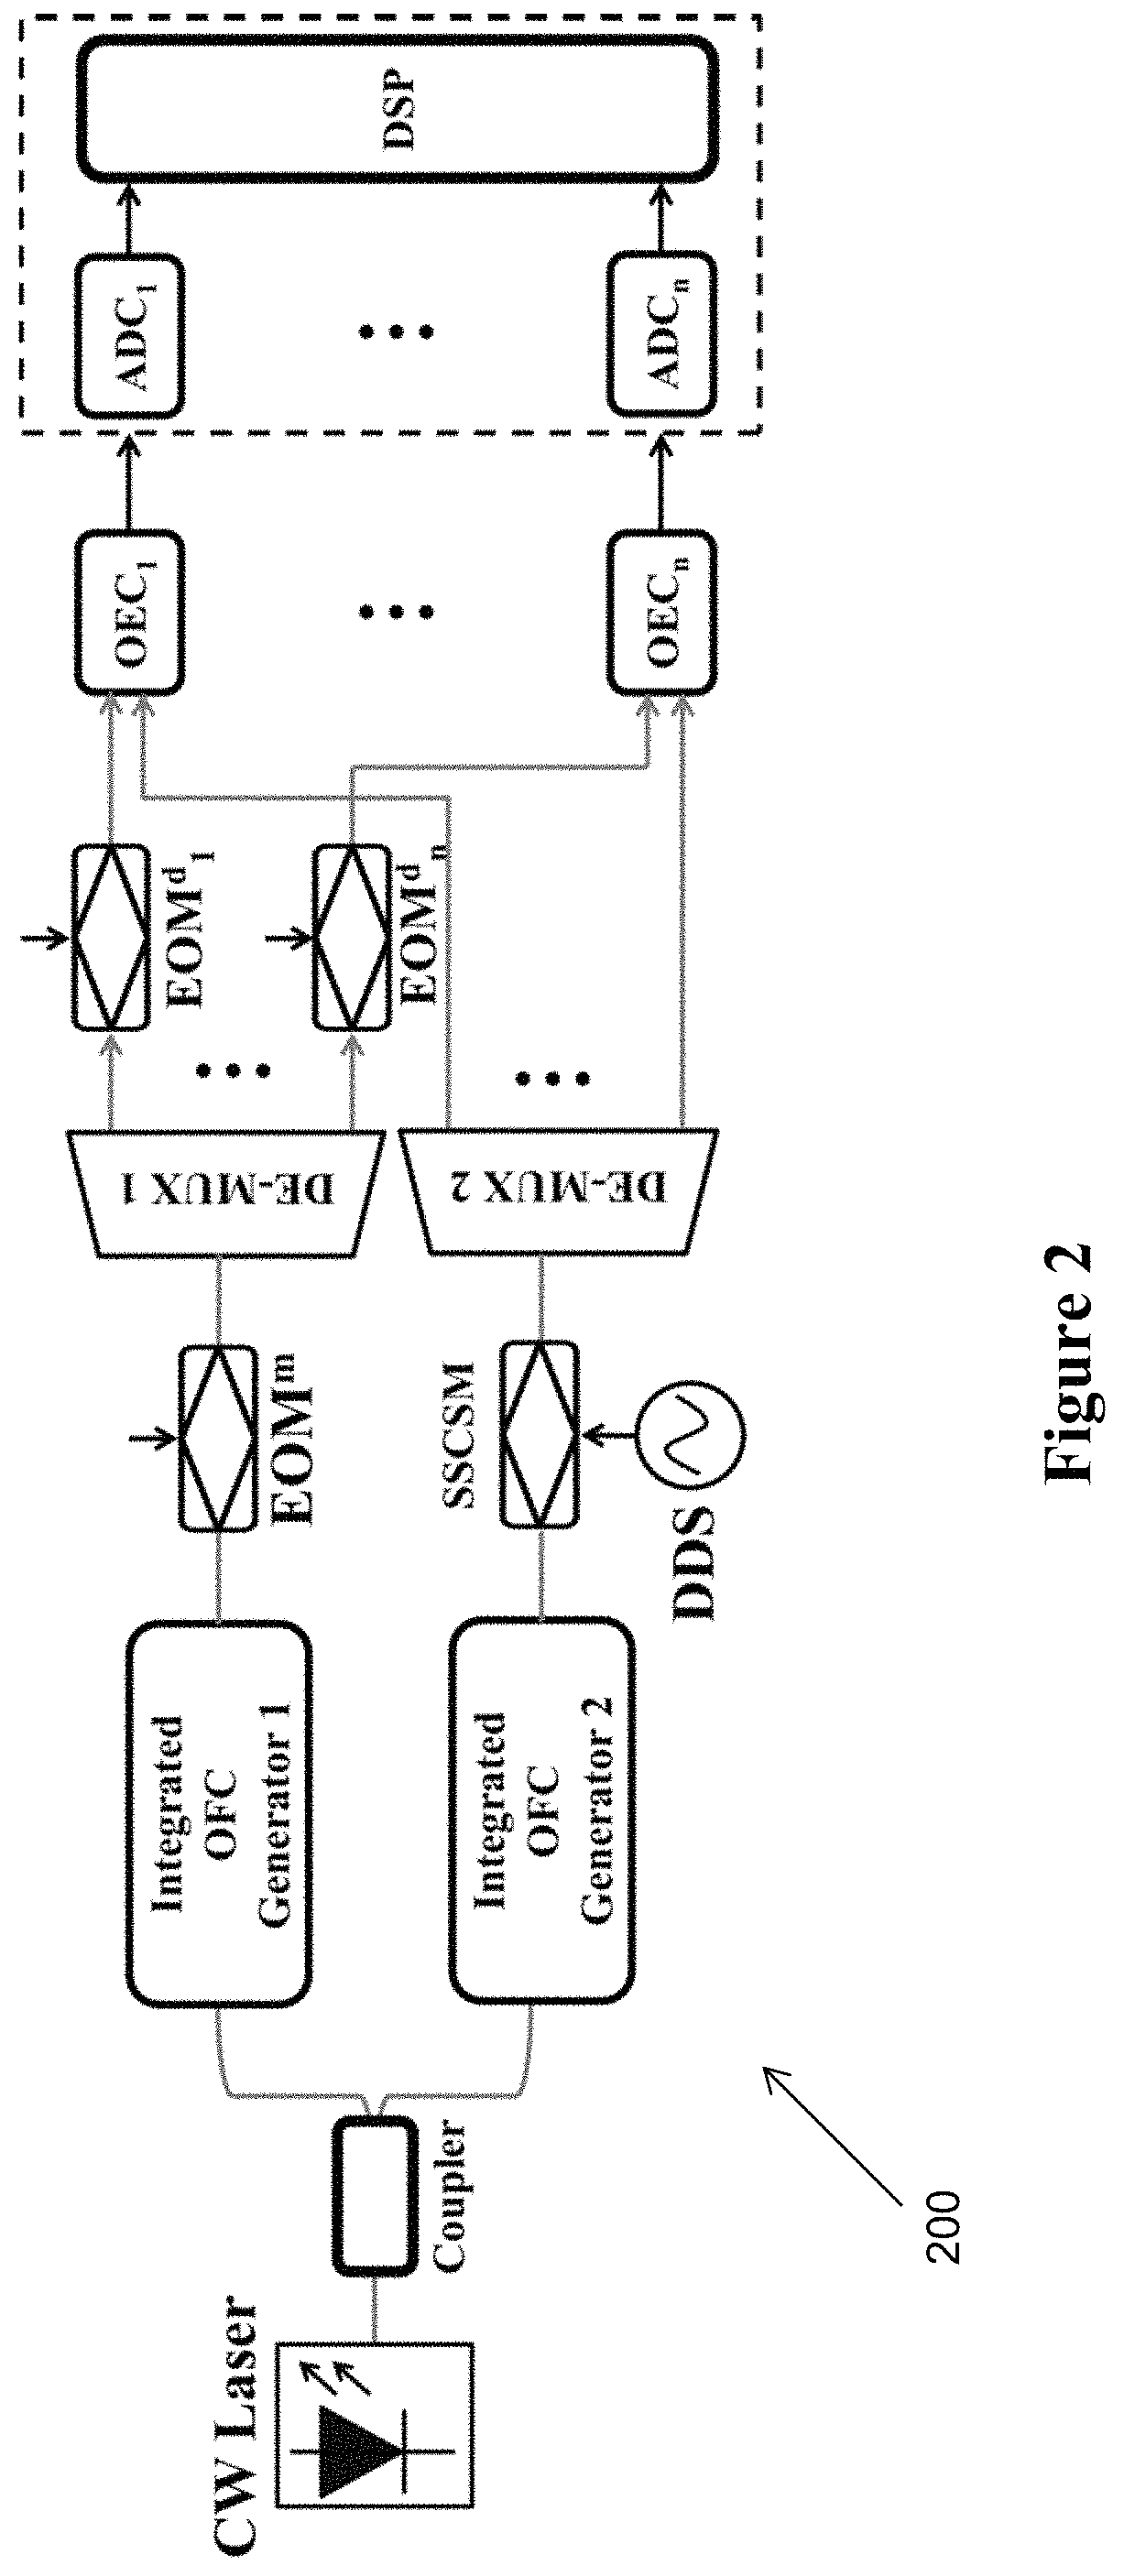 Integrated photonic microwave transceiver system